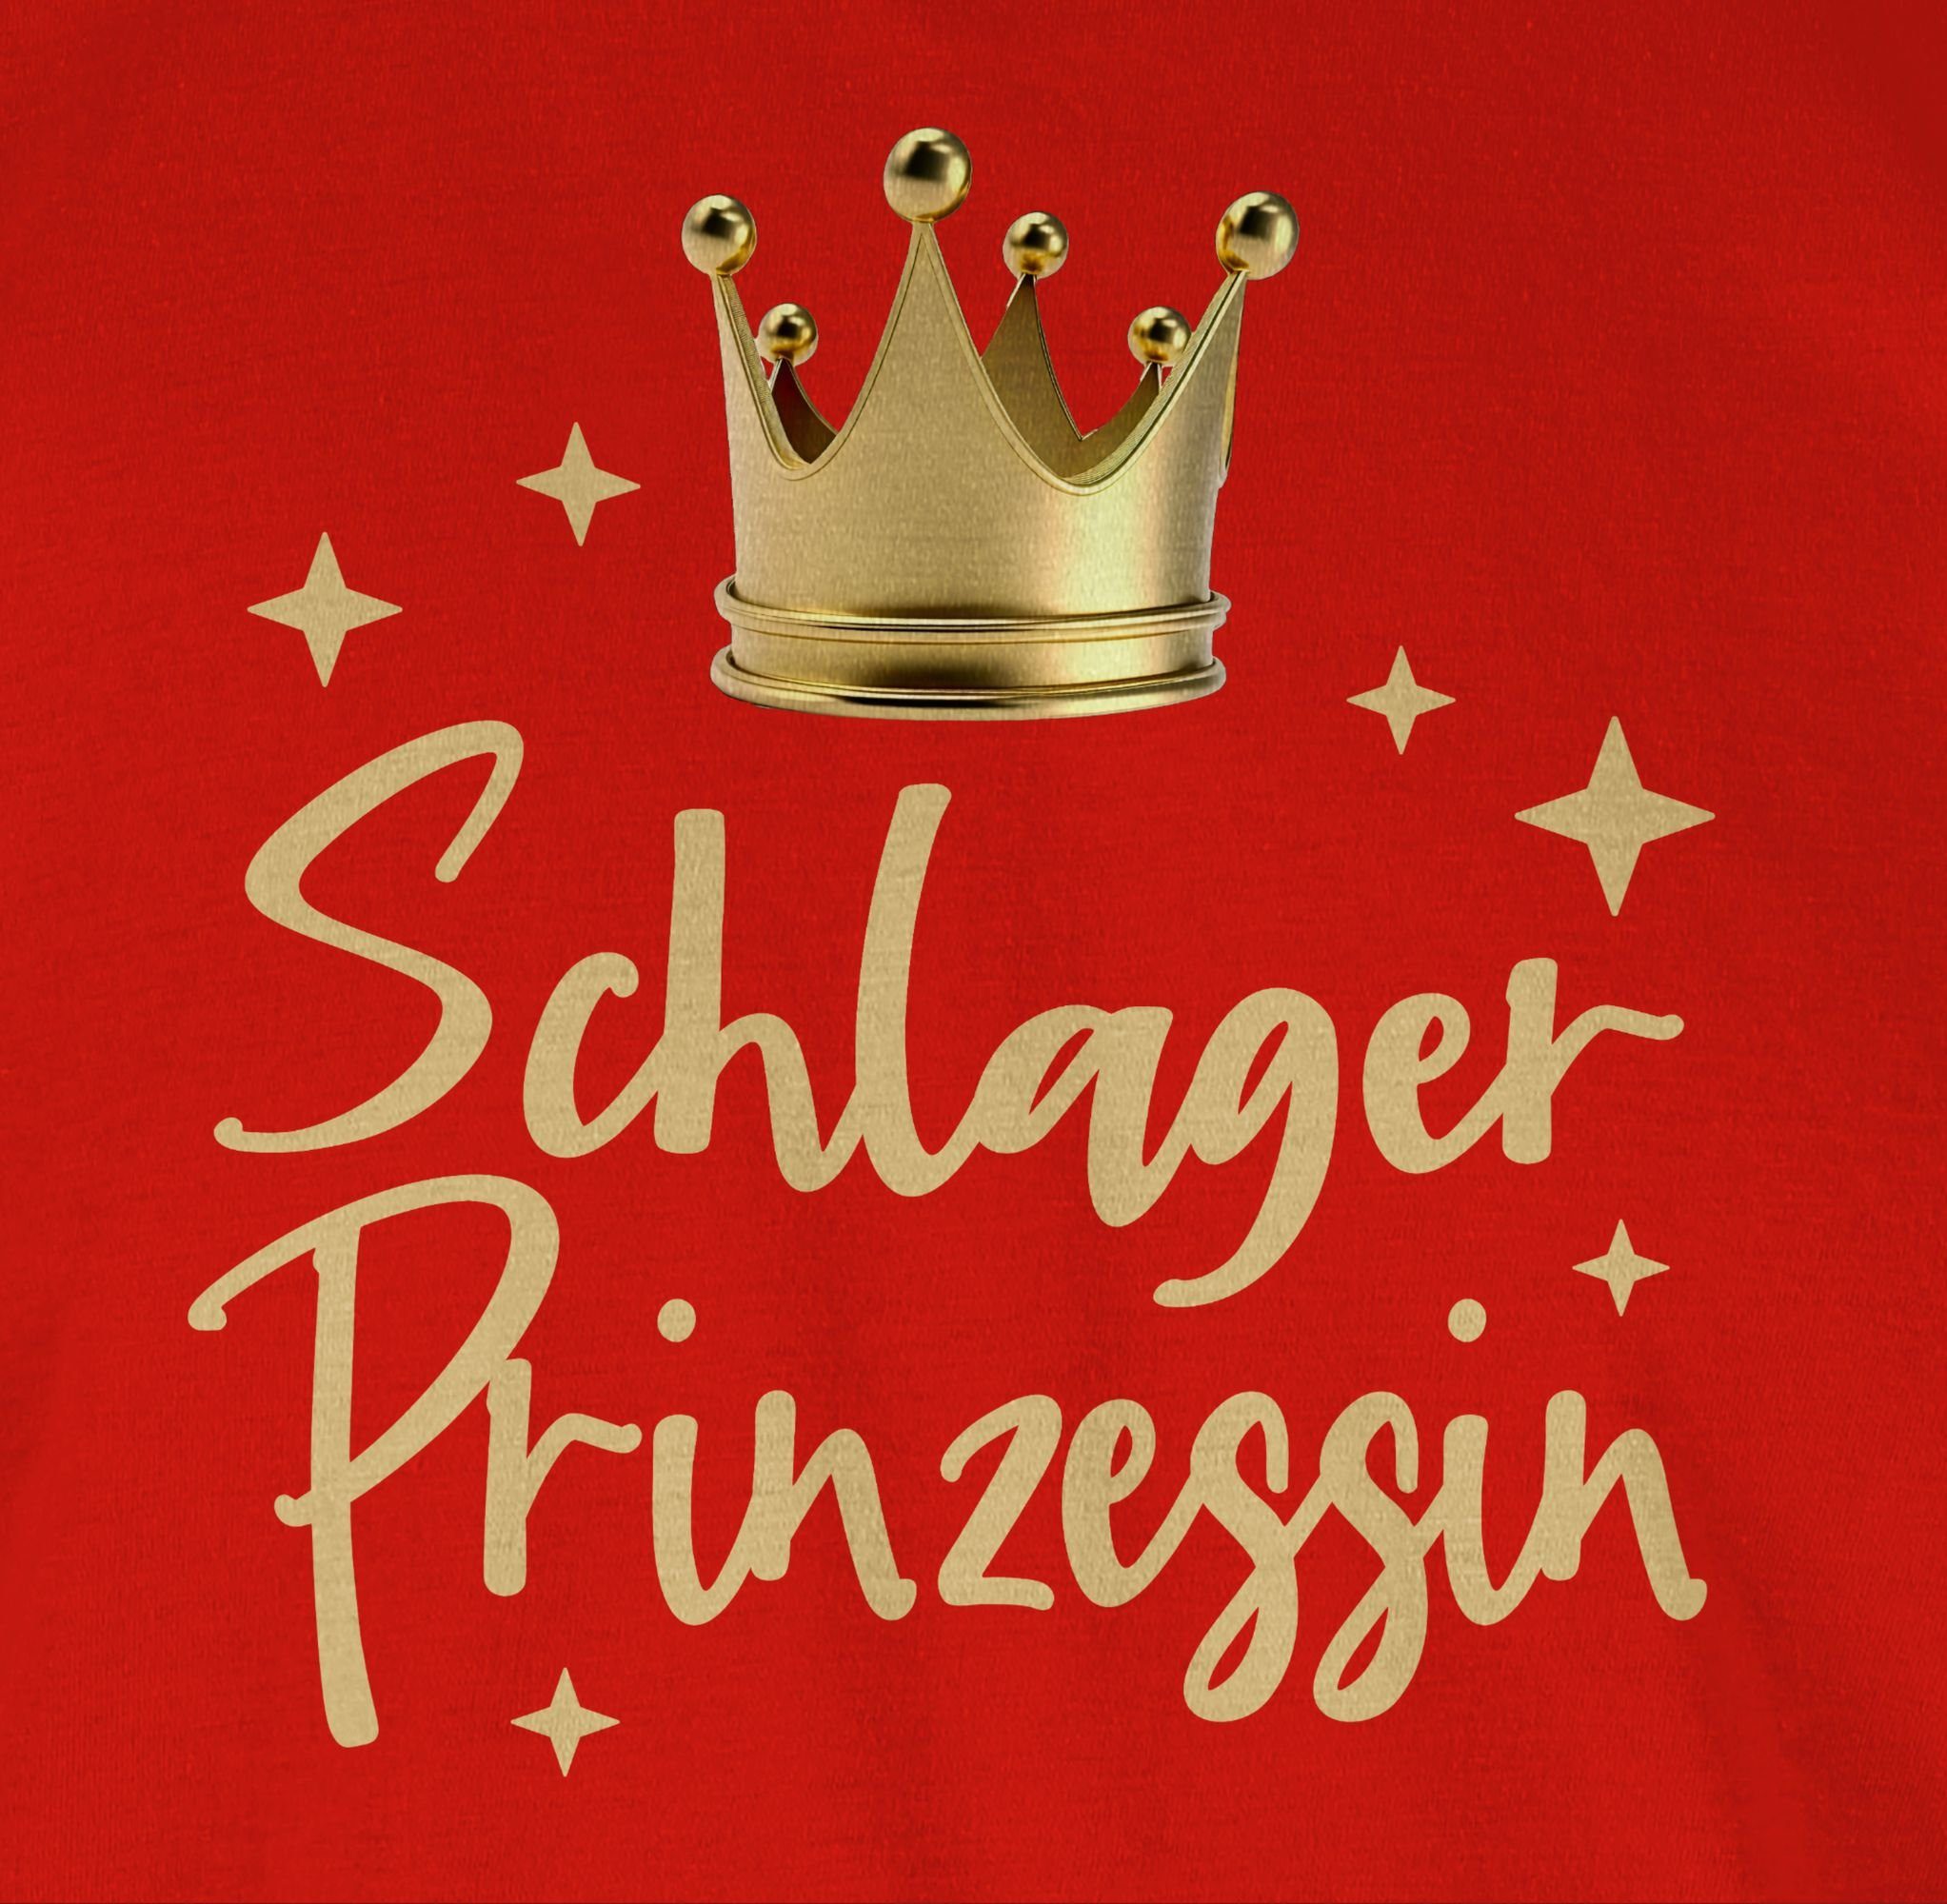 Schlager Rot Outfit - Schlager Shirtracer Volksmusik Schlagerparty Konzert 03 Party Prinzessin T-Shirt